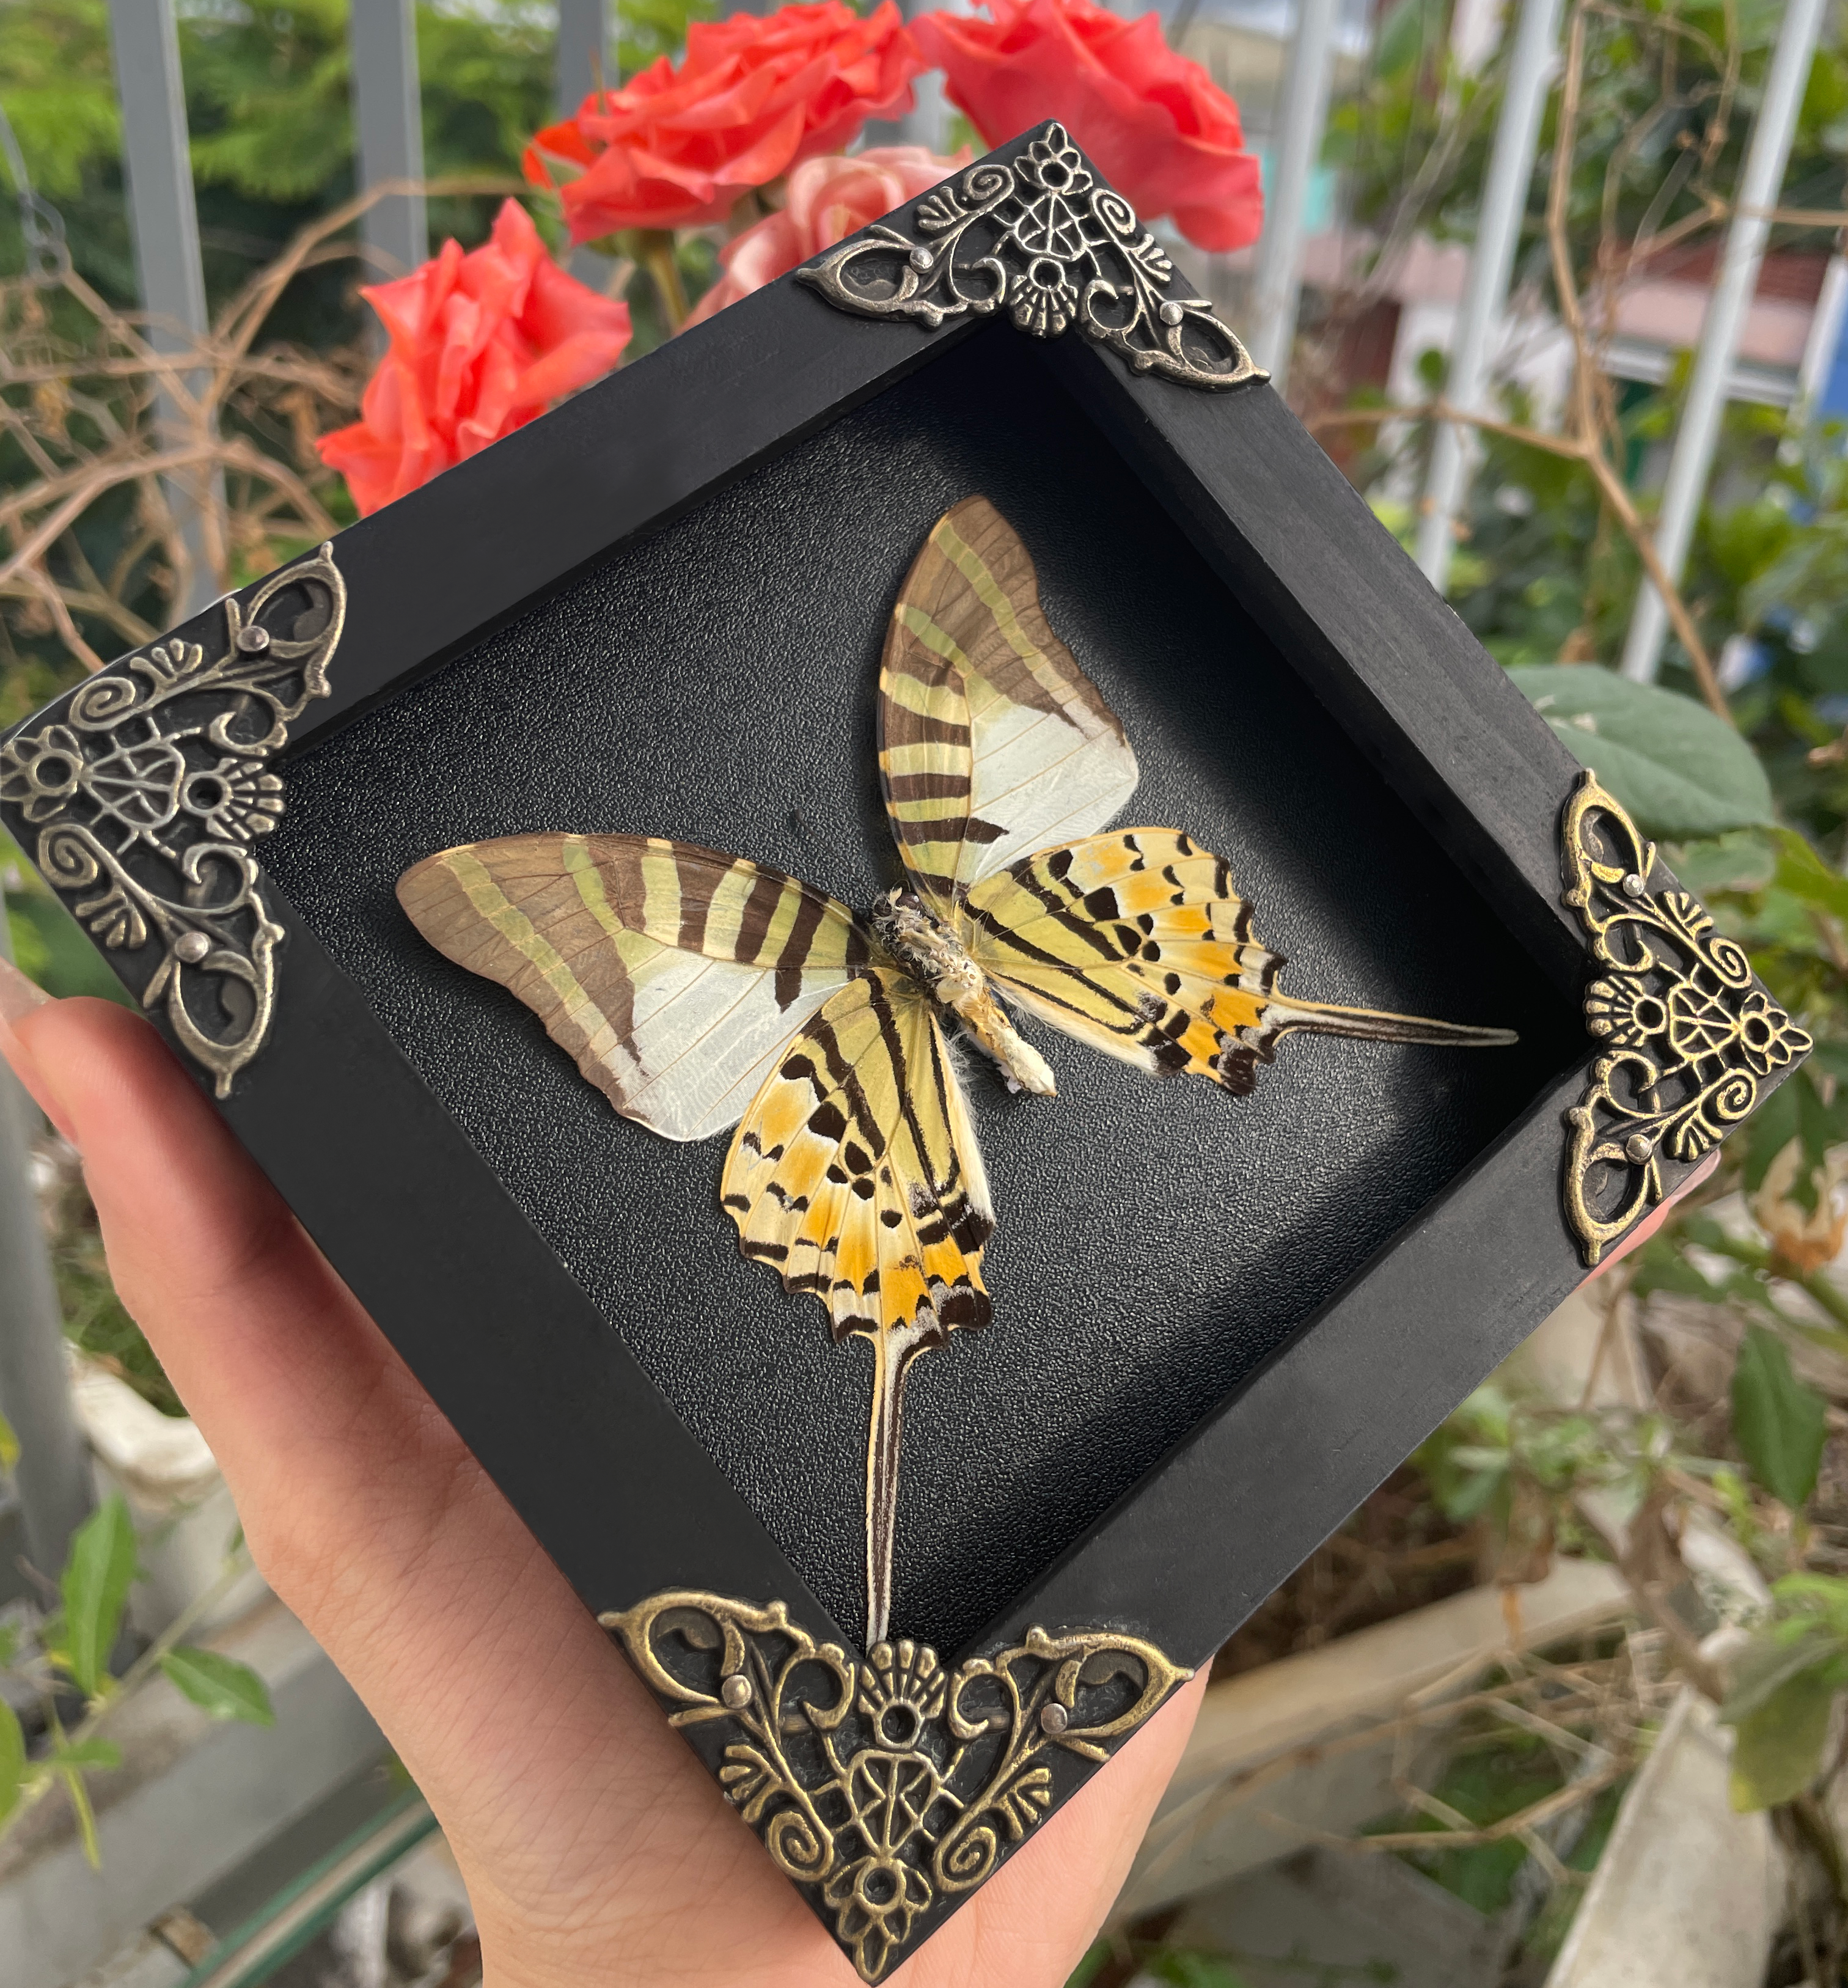 Real Butterfly Entomology Display Shadow Box Taxidermy Insect Decor